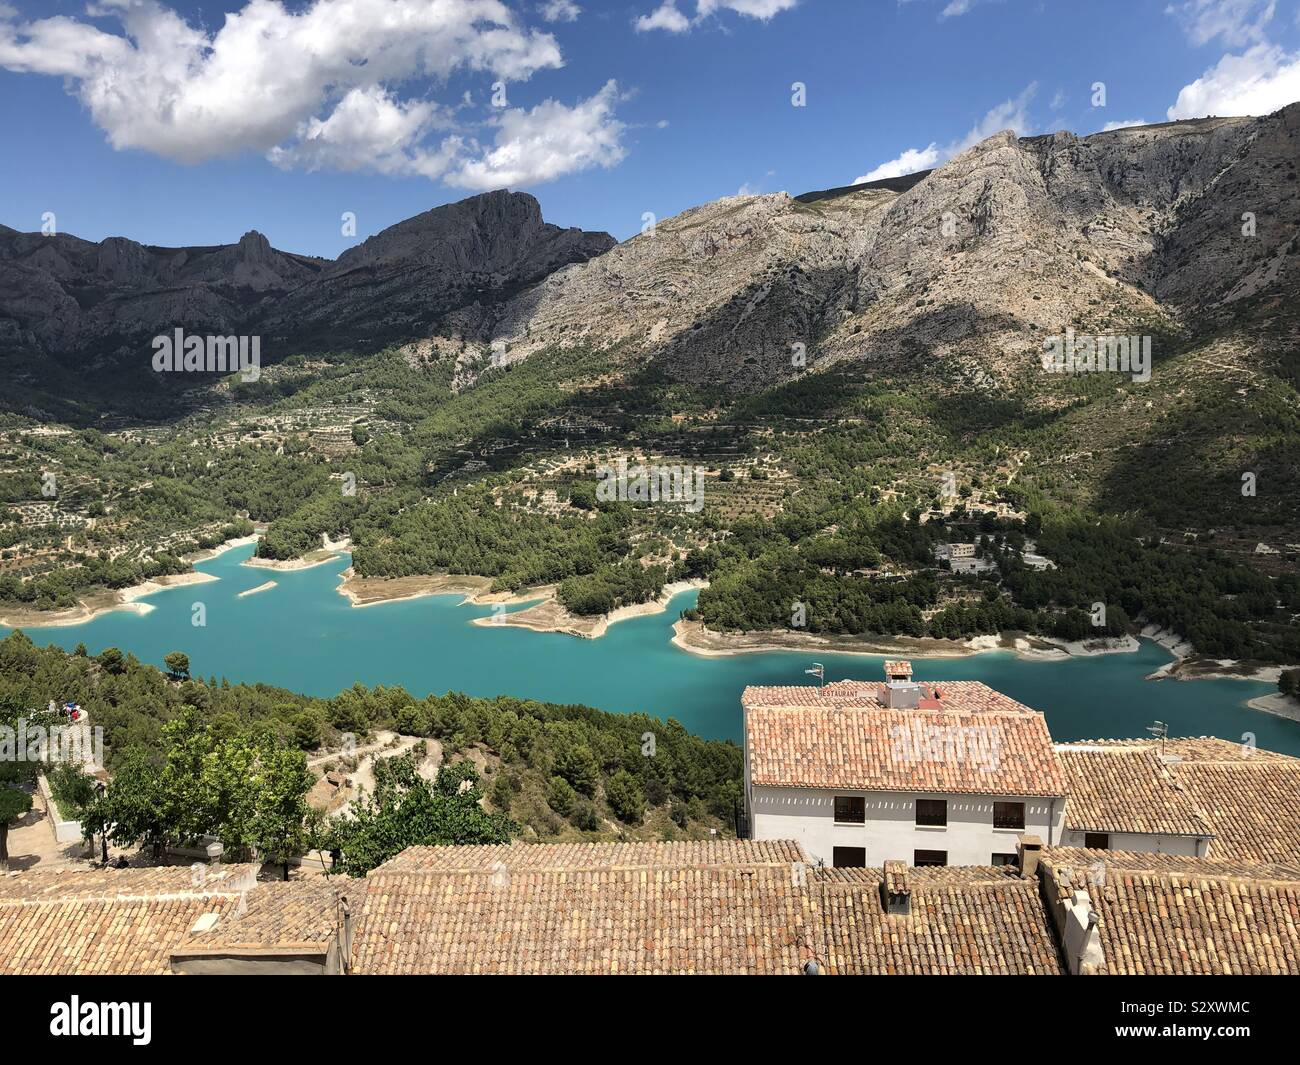 View of Guadalest reservoir and mountains near Benidorm, Spain Stock Photo